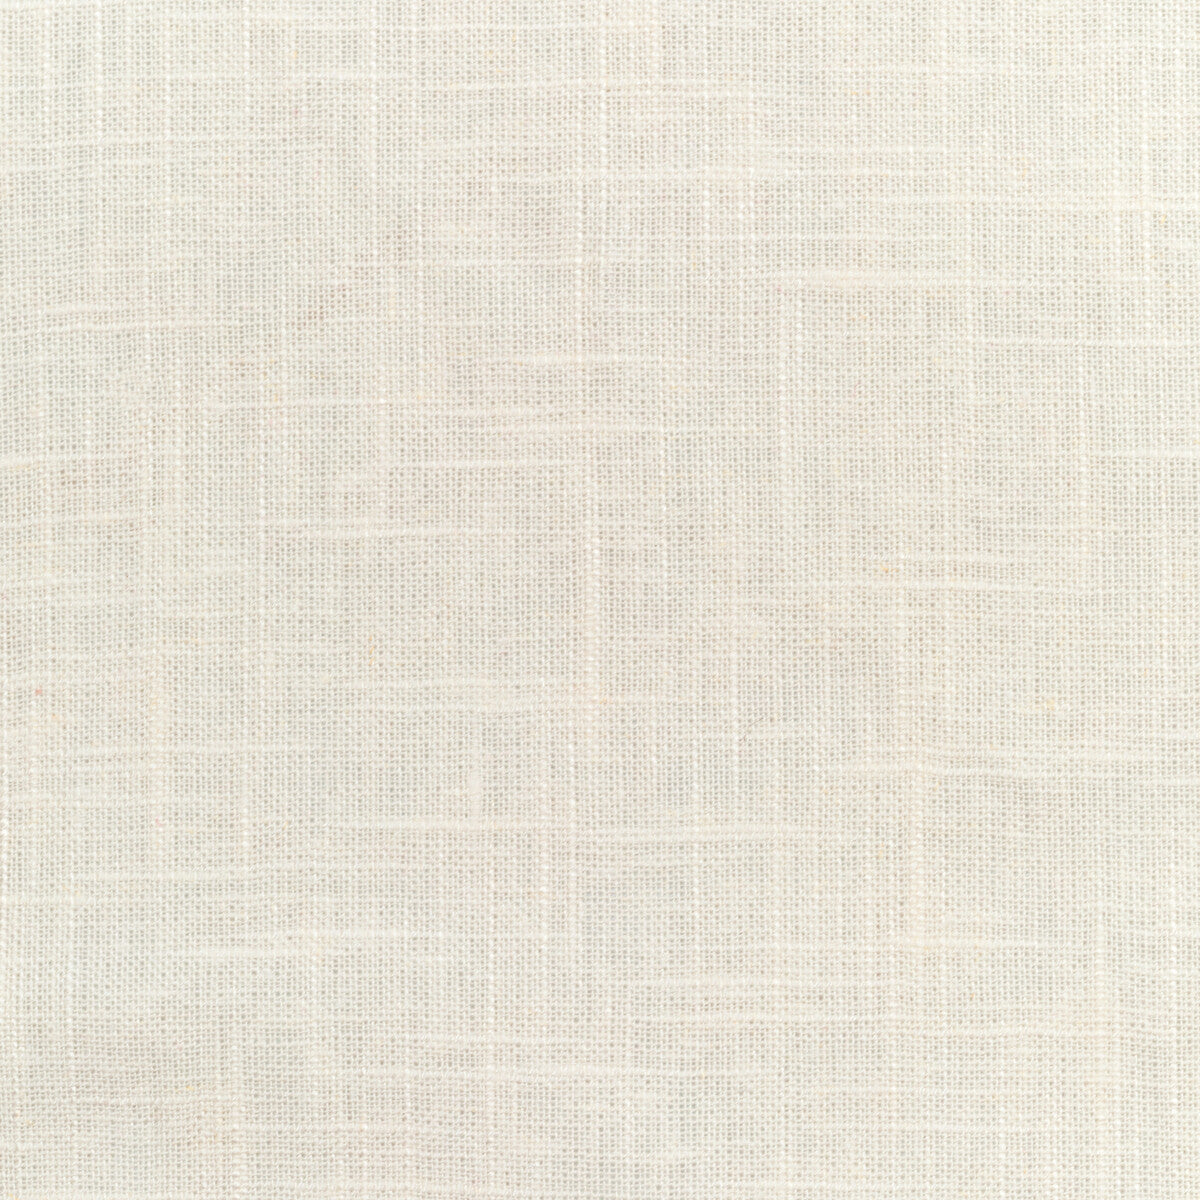 Barnegat fabric in ice color - pattern 24573.101.0 - by Kravet Basics in the Perfect Plains collection